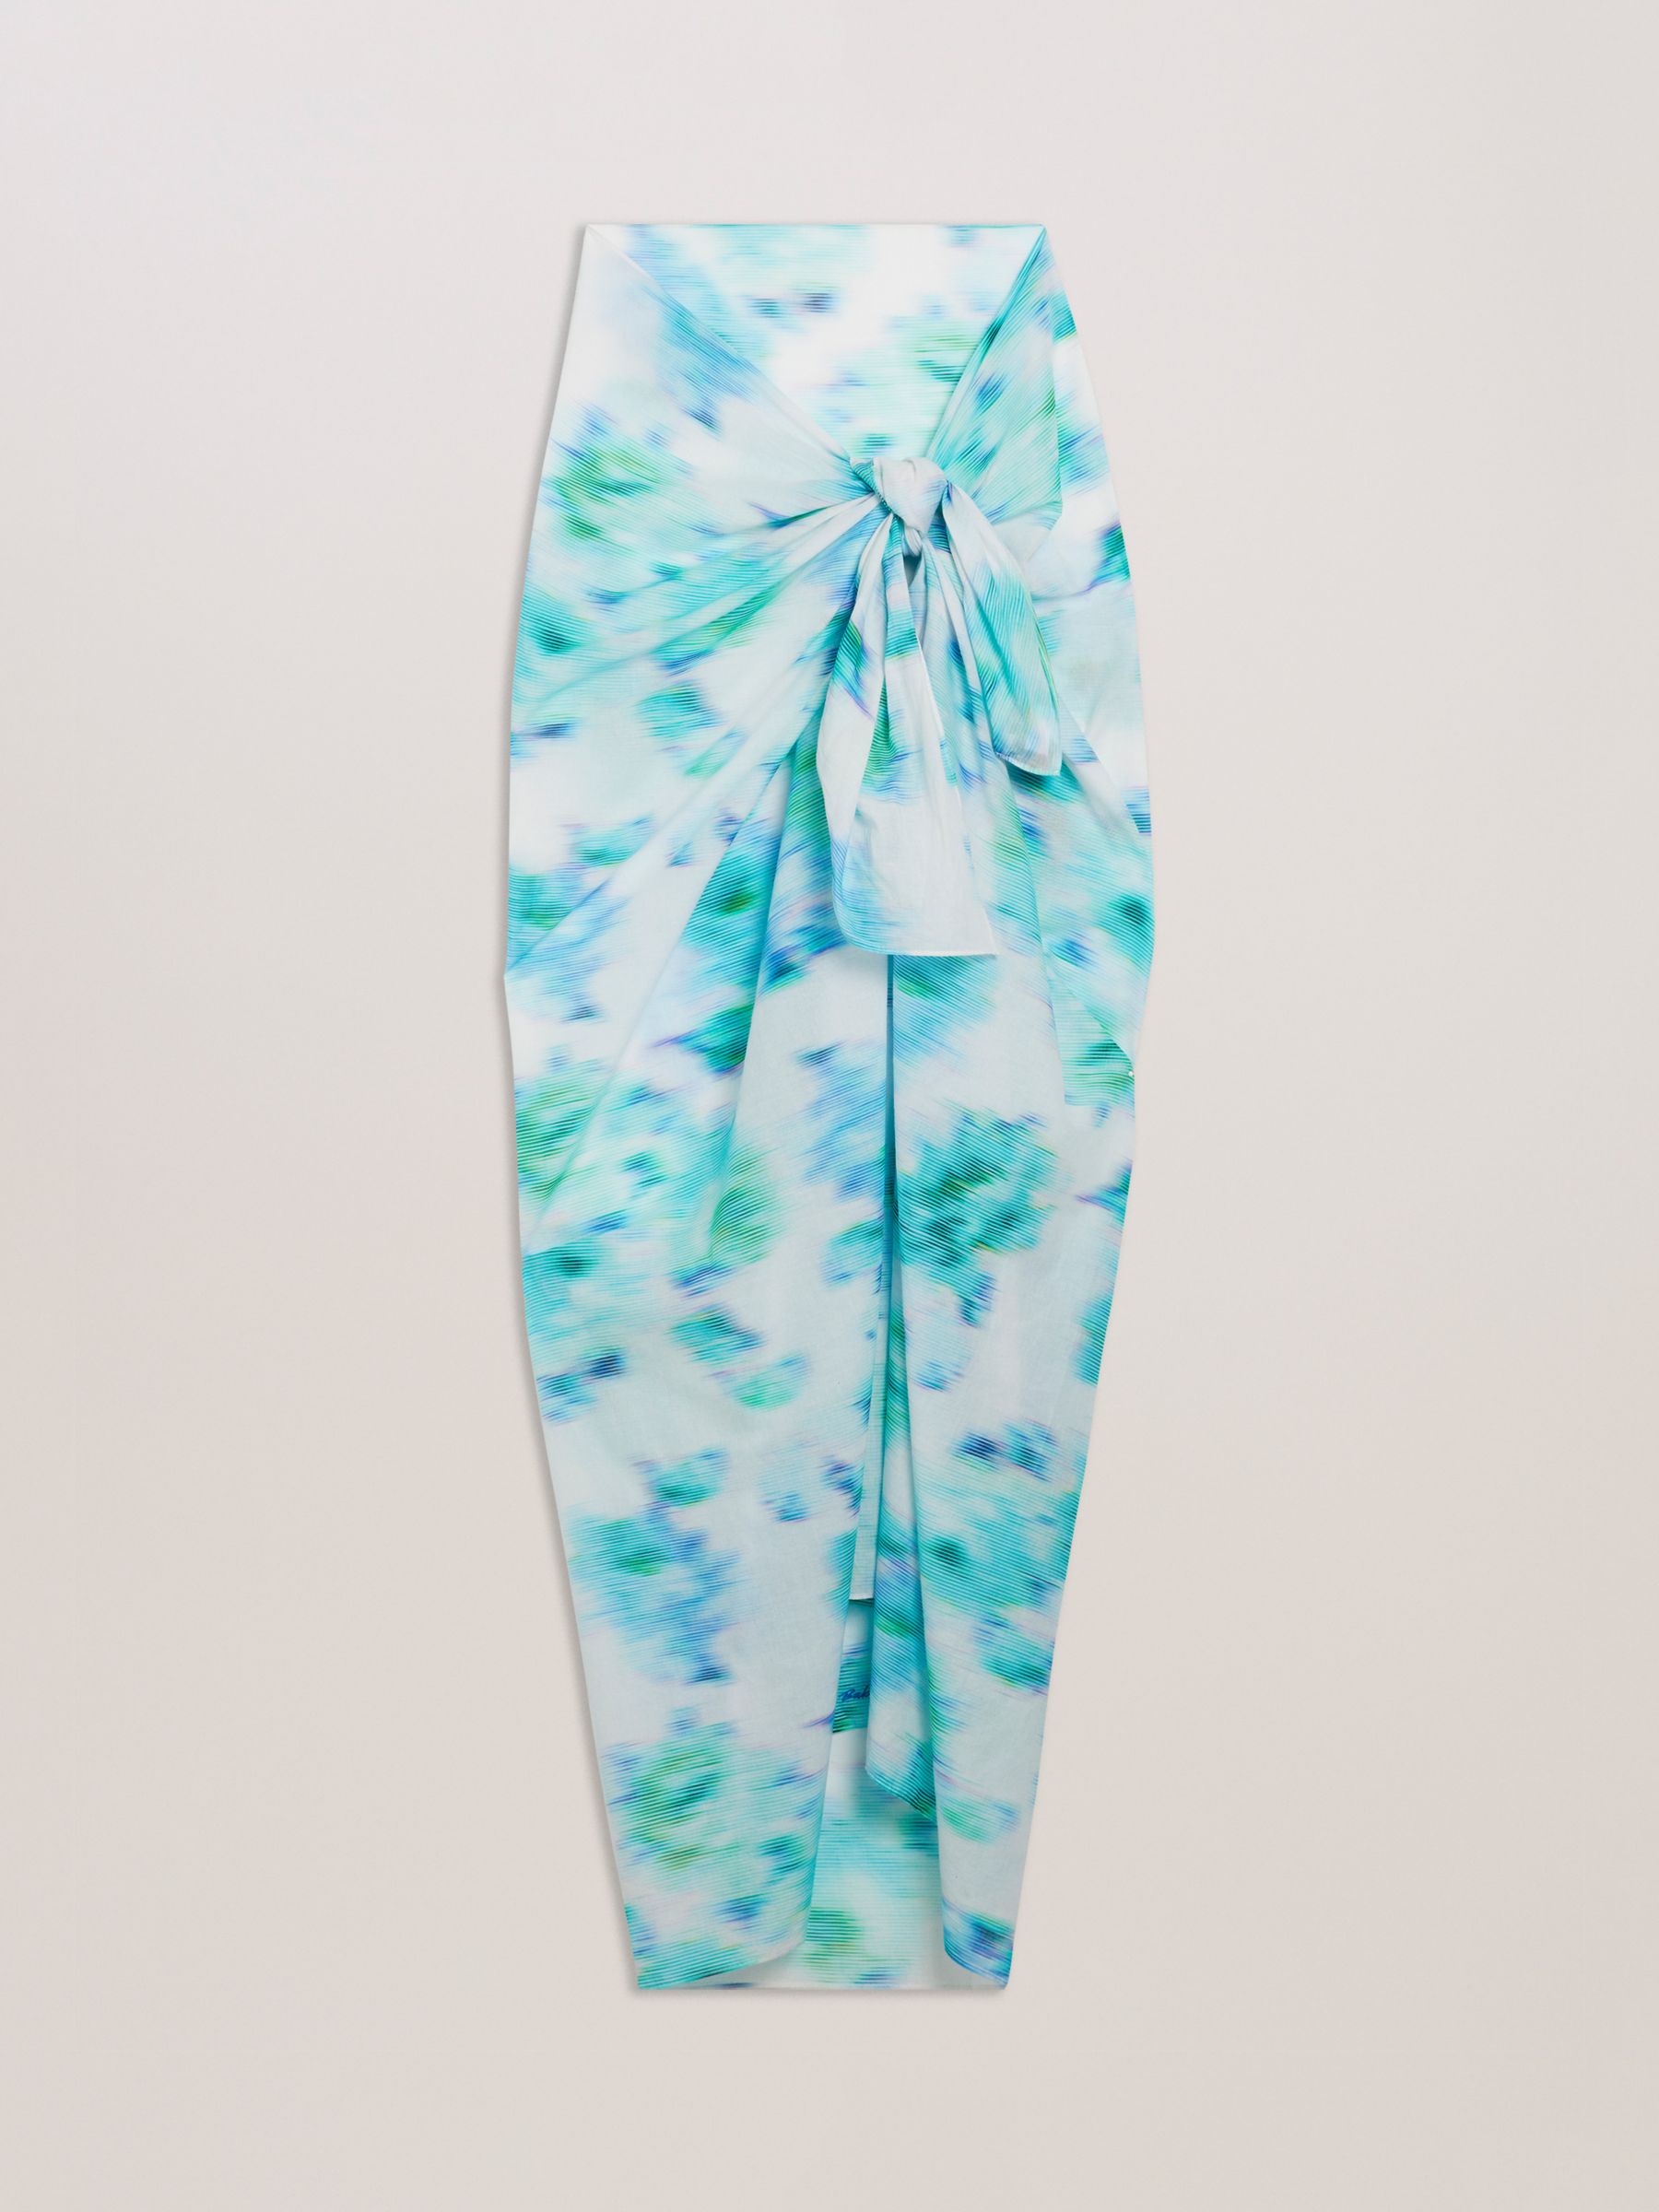 Ted Baker Timera Abstract Print Sarong, White/Turquoise, One Size